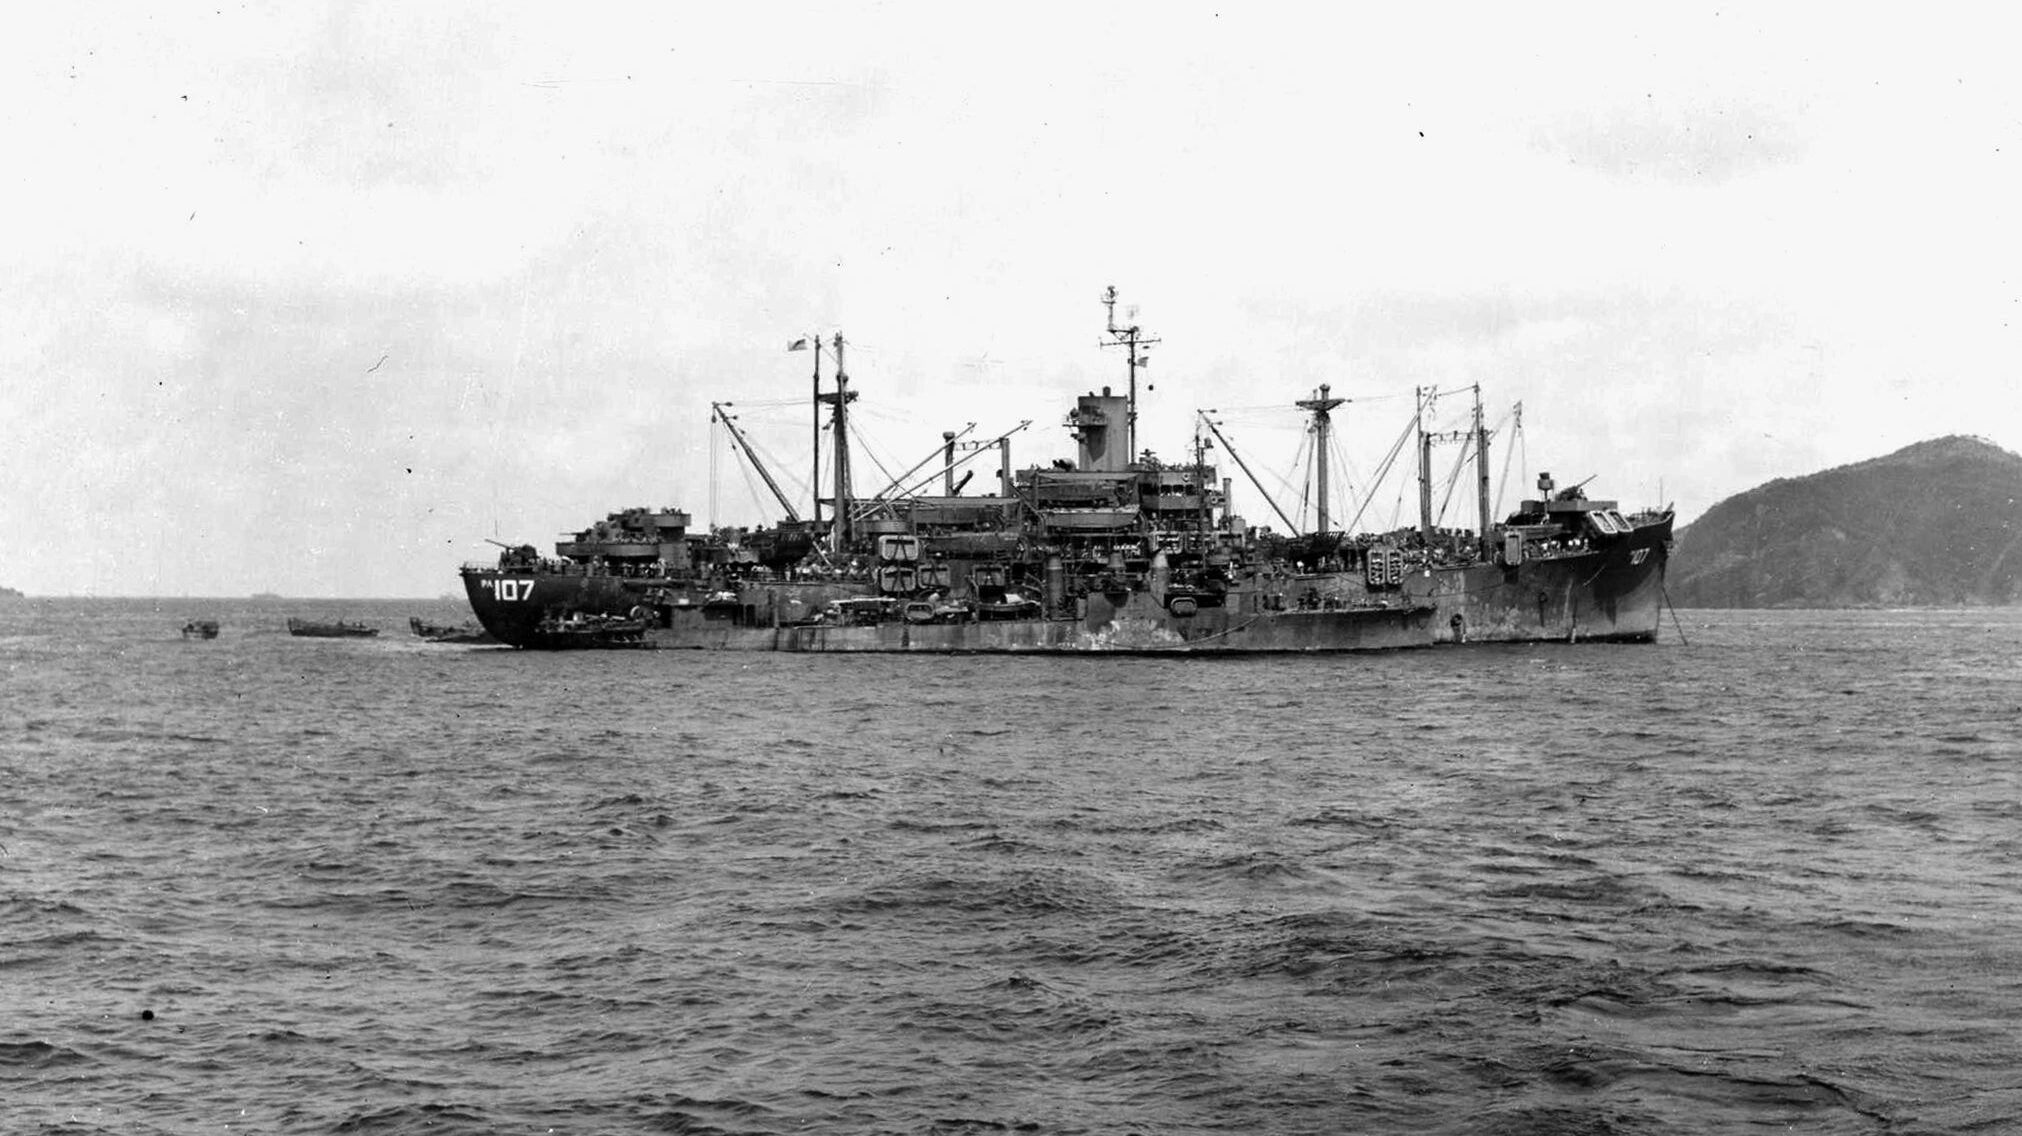 The destroyer USS Howard comes alongside the attack transport USS Goodhue, which lies at anchor. The Goodhue was among hundreds of U.S. Navy ships that were assailed by Japanese kamikazes off Okinawa in April 1945. 